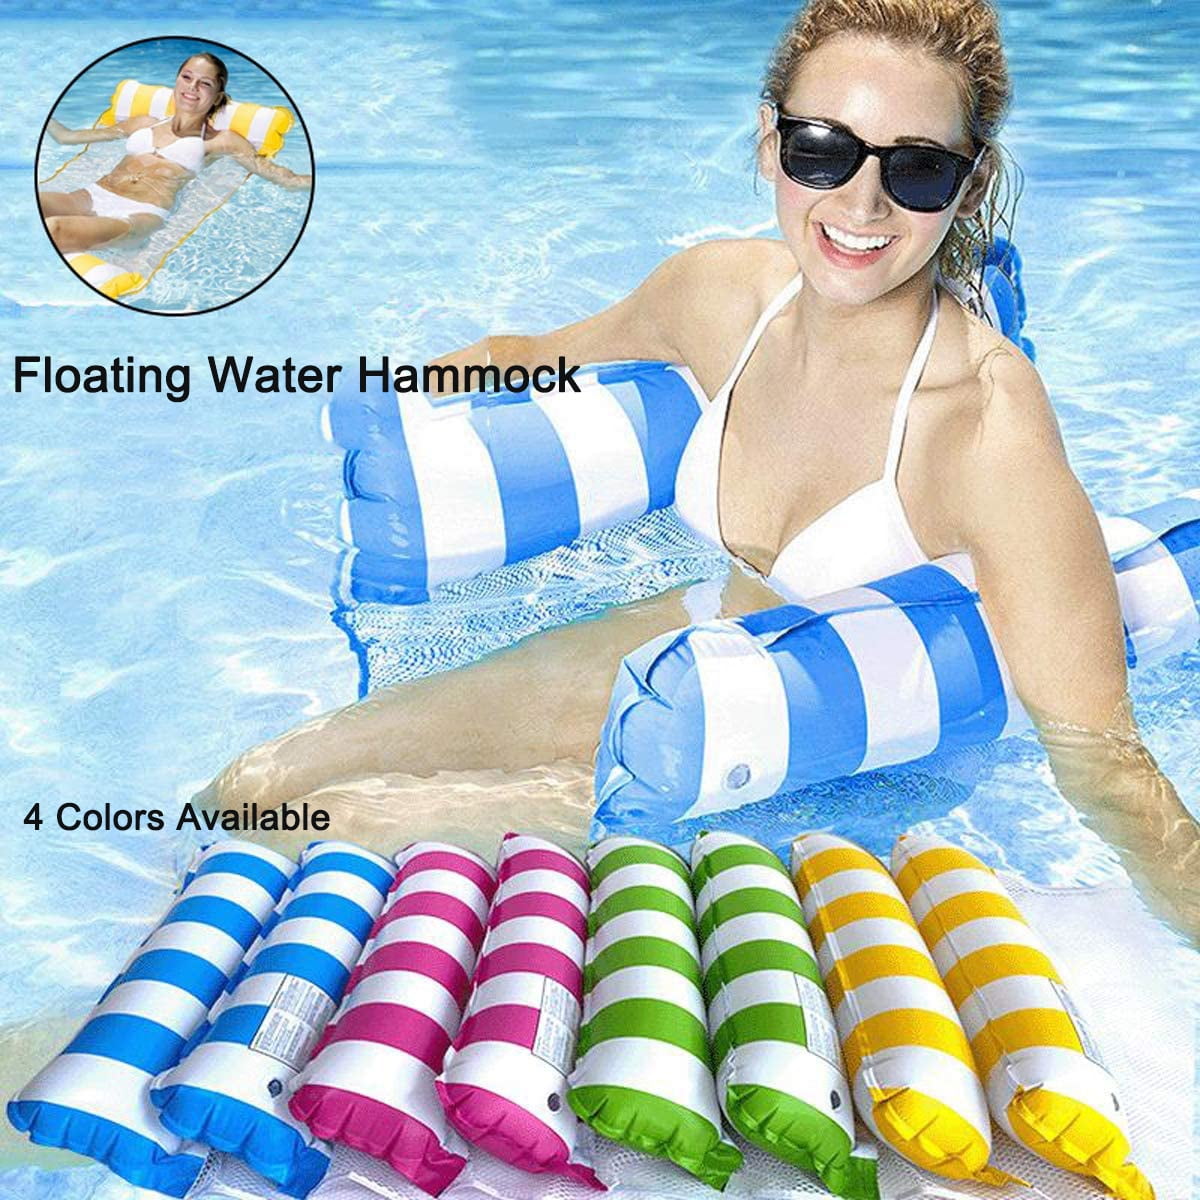 Inflatable Floating Water Hammock Float Pool Lounge Bed Swimming Chair 6 Colors 